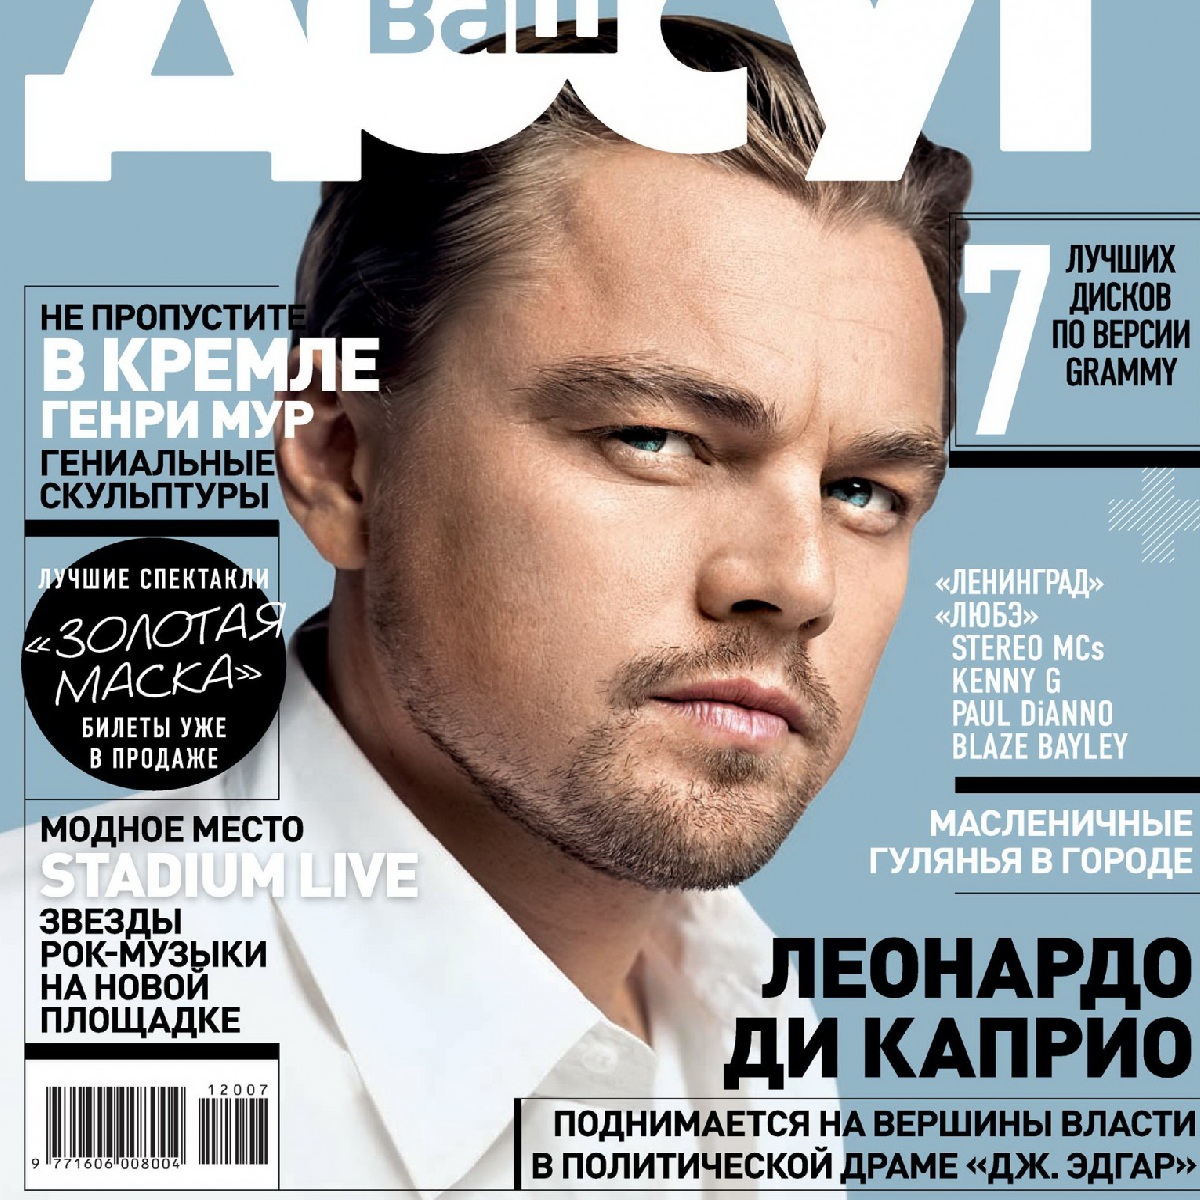 Actor on the cover of a magazine